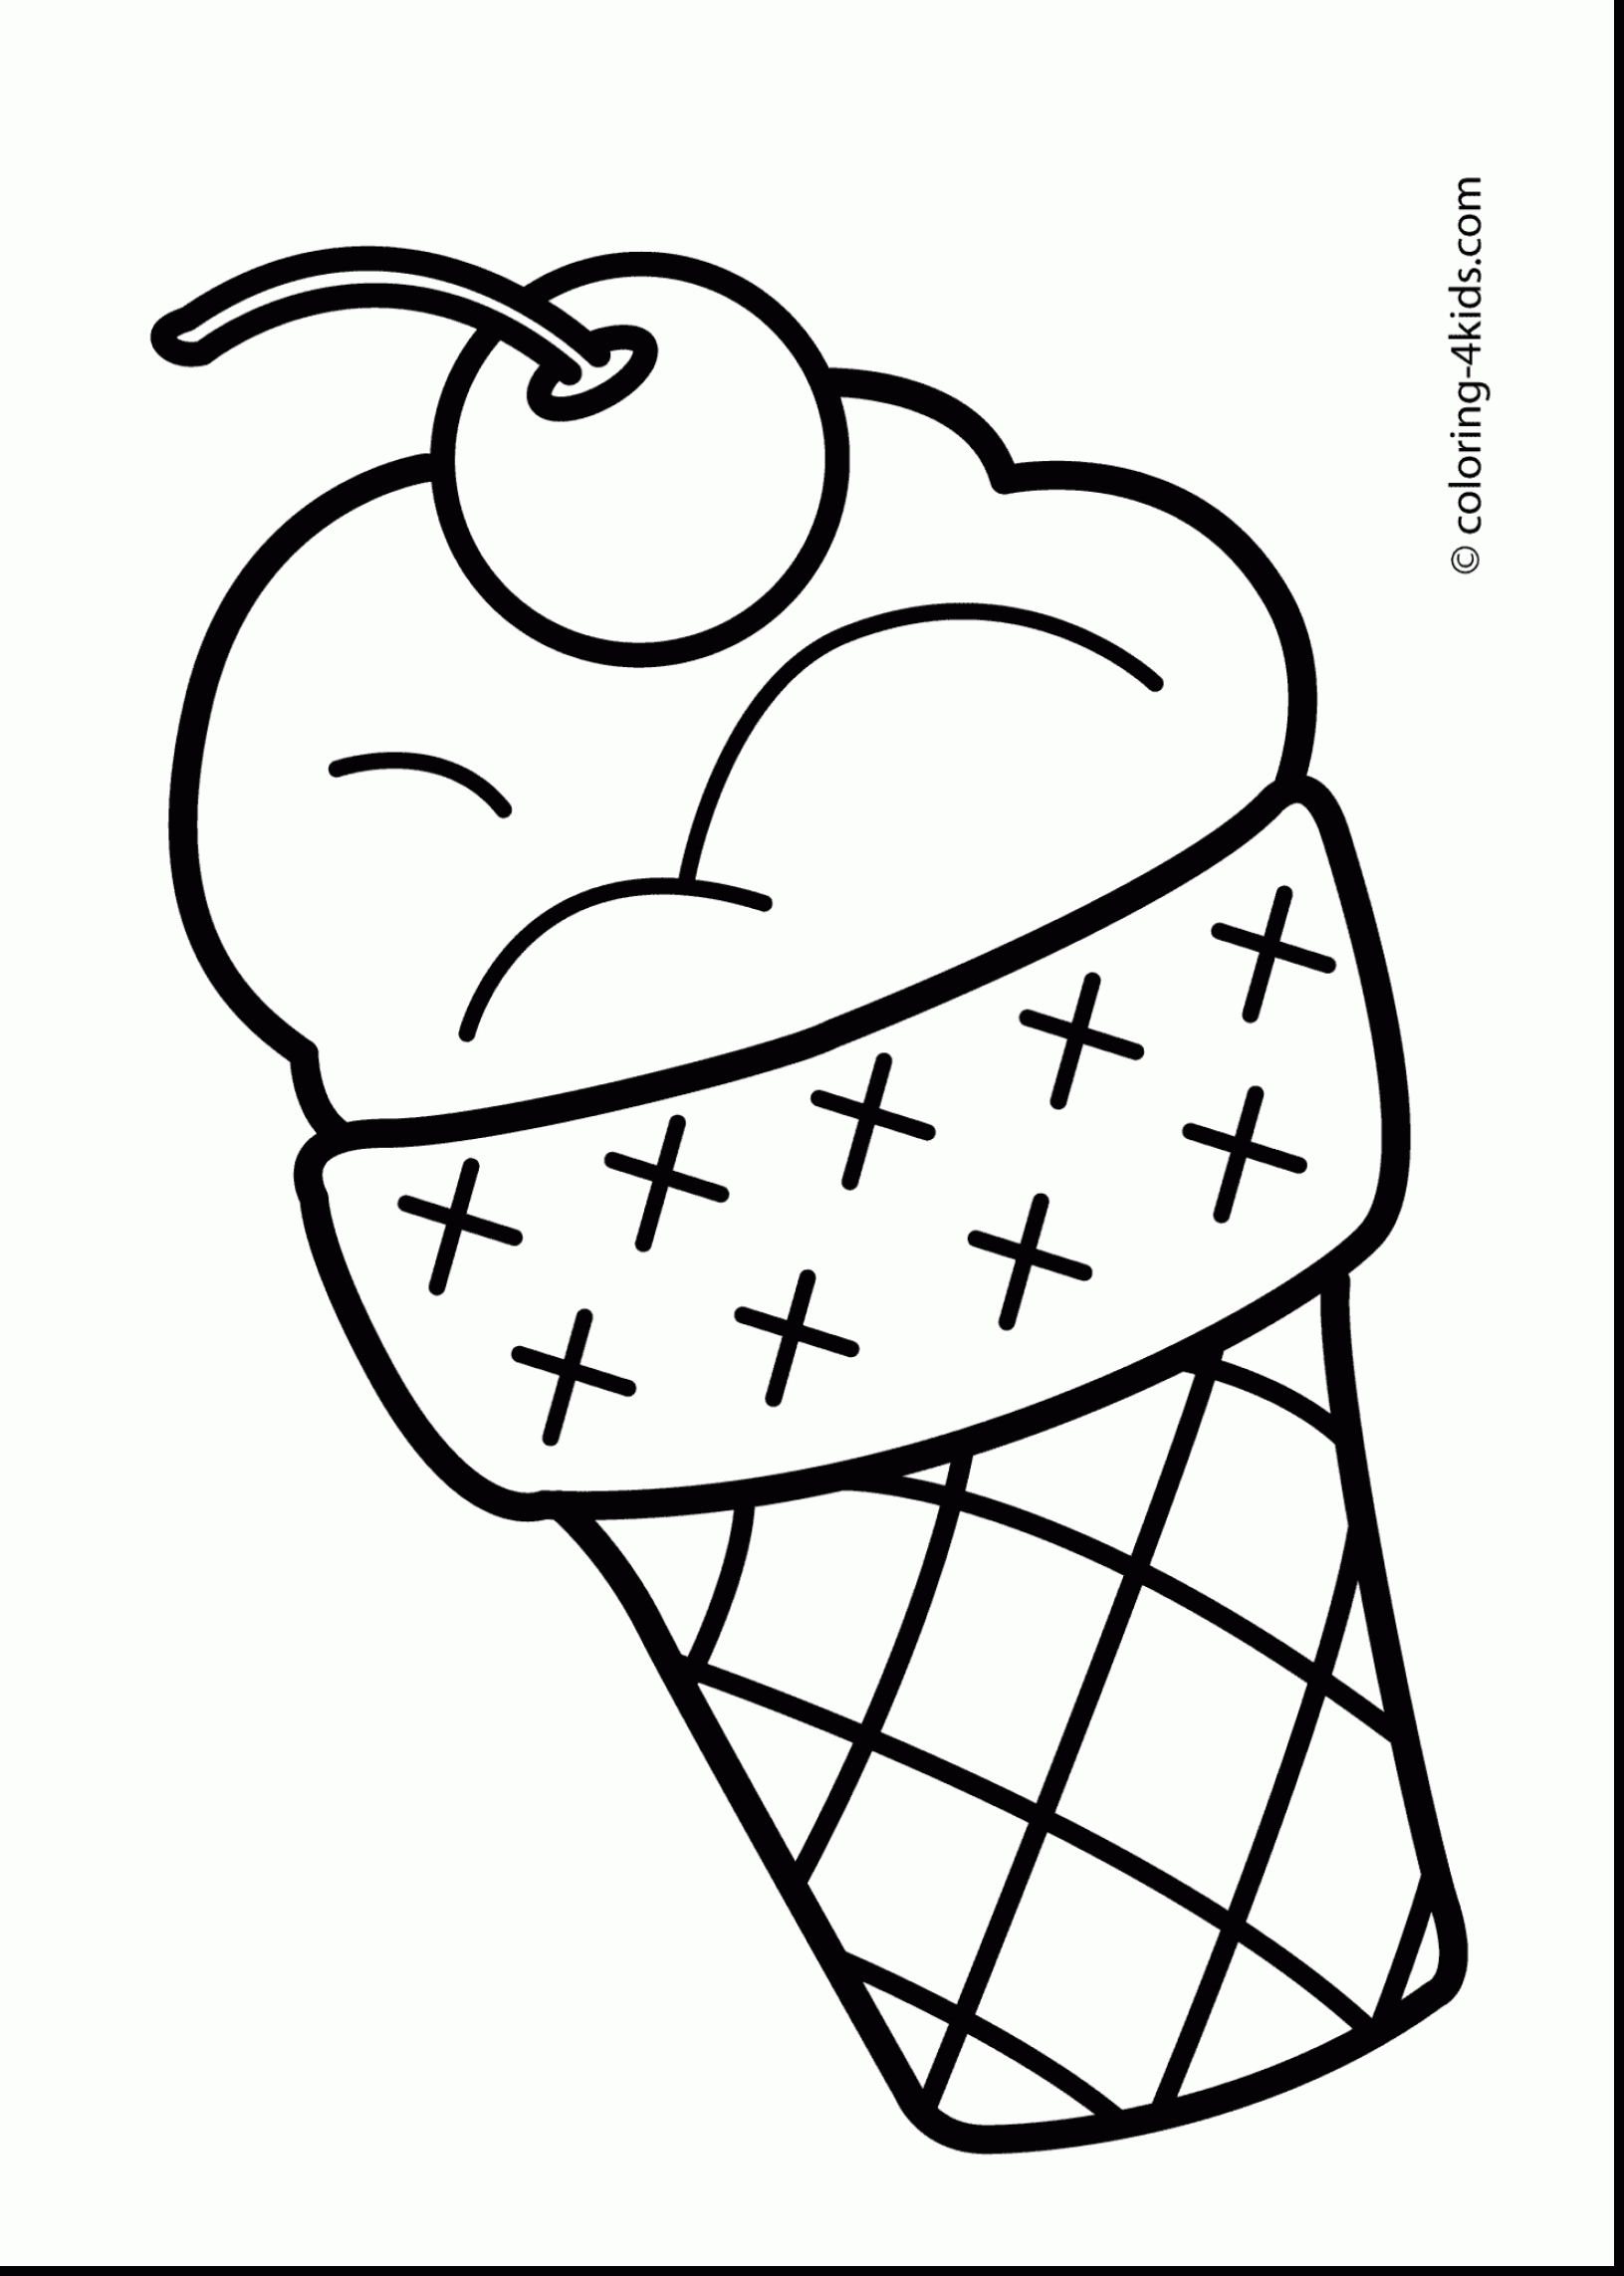 Coloring Pages : Coloring Pages Ice Cream Sheets Pdf Free Printable - Ice Cream Color Pages Printable Free